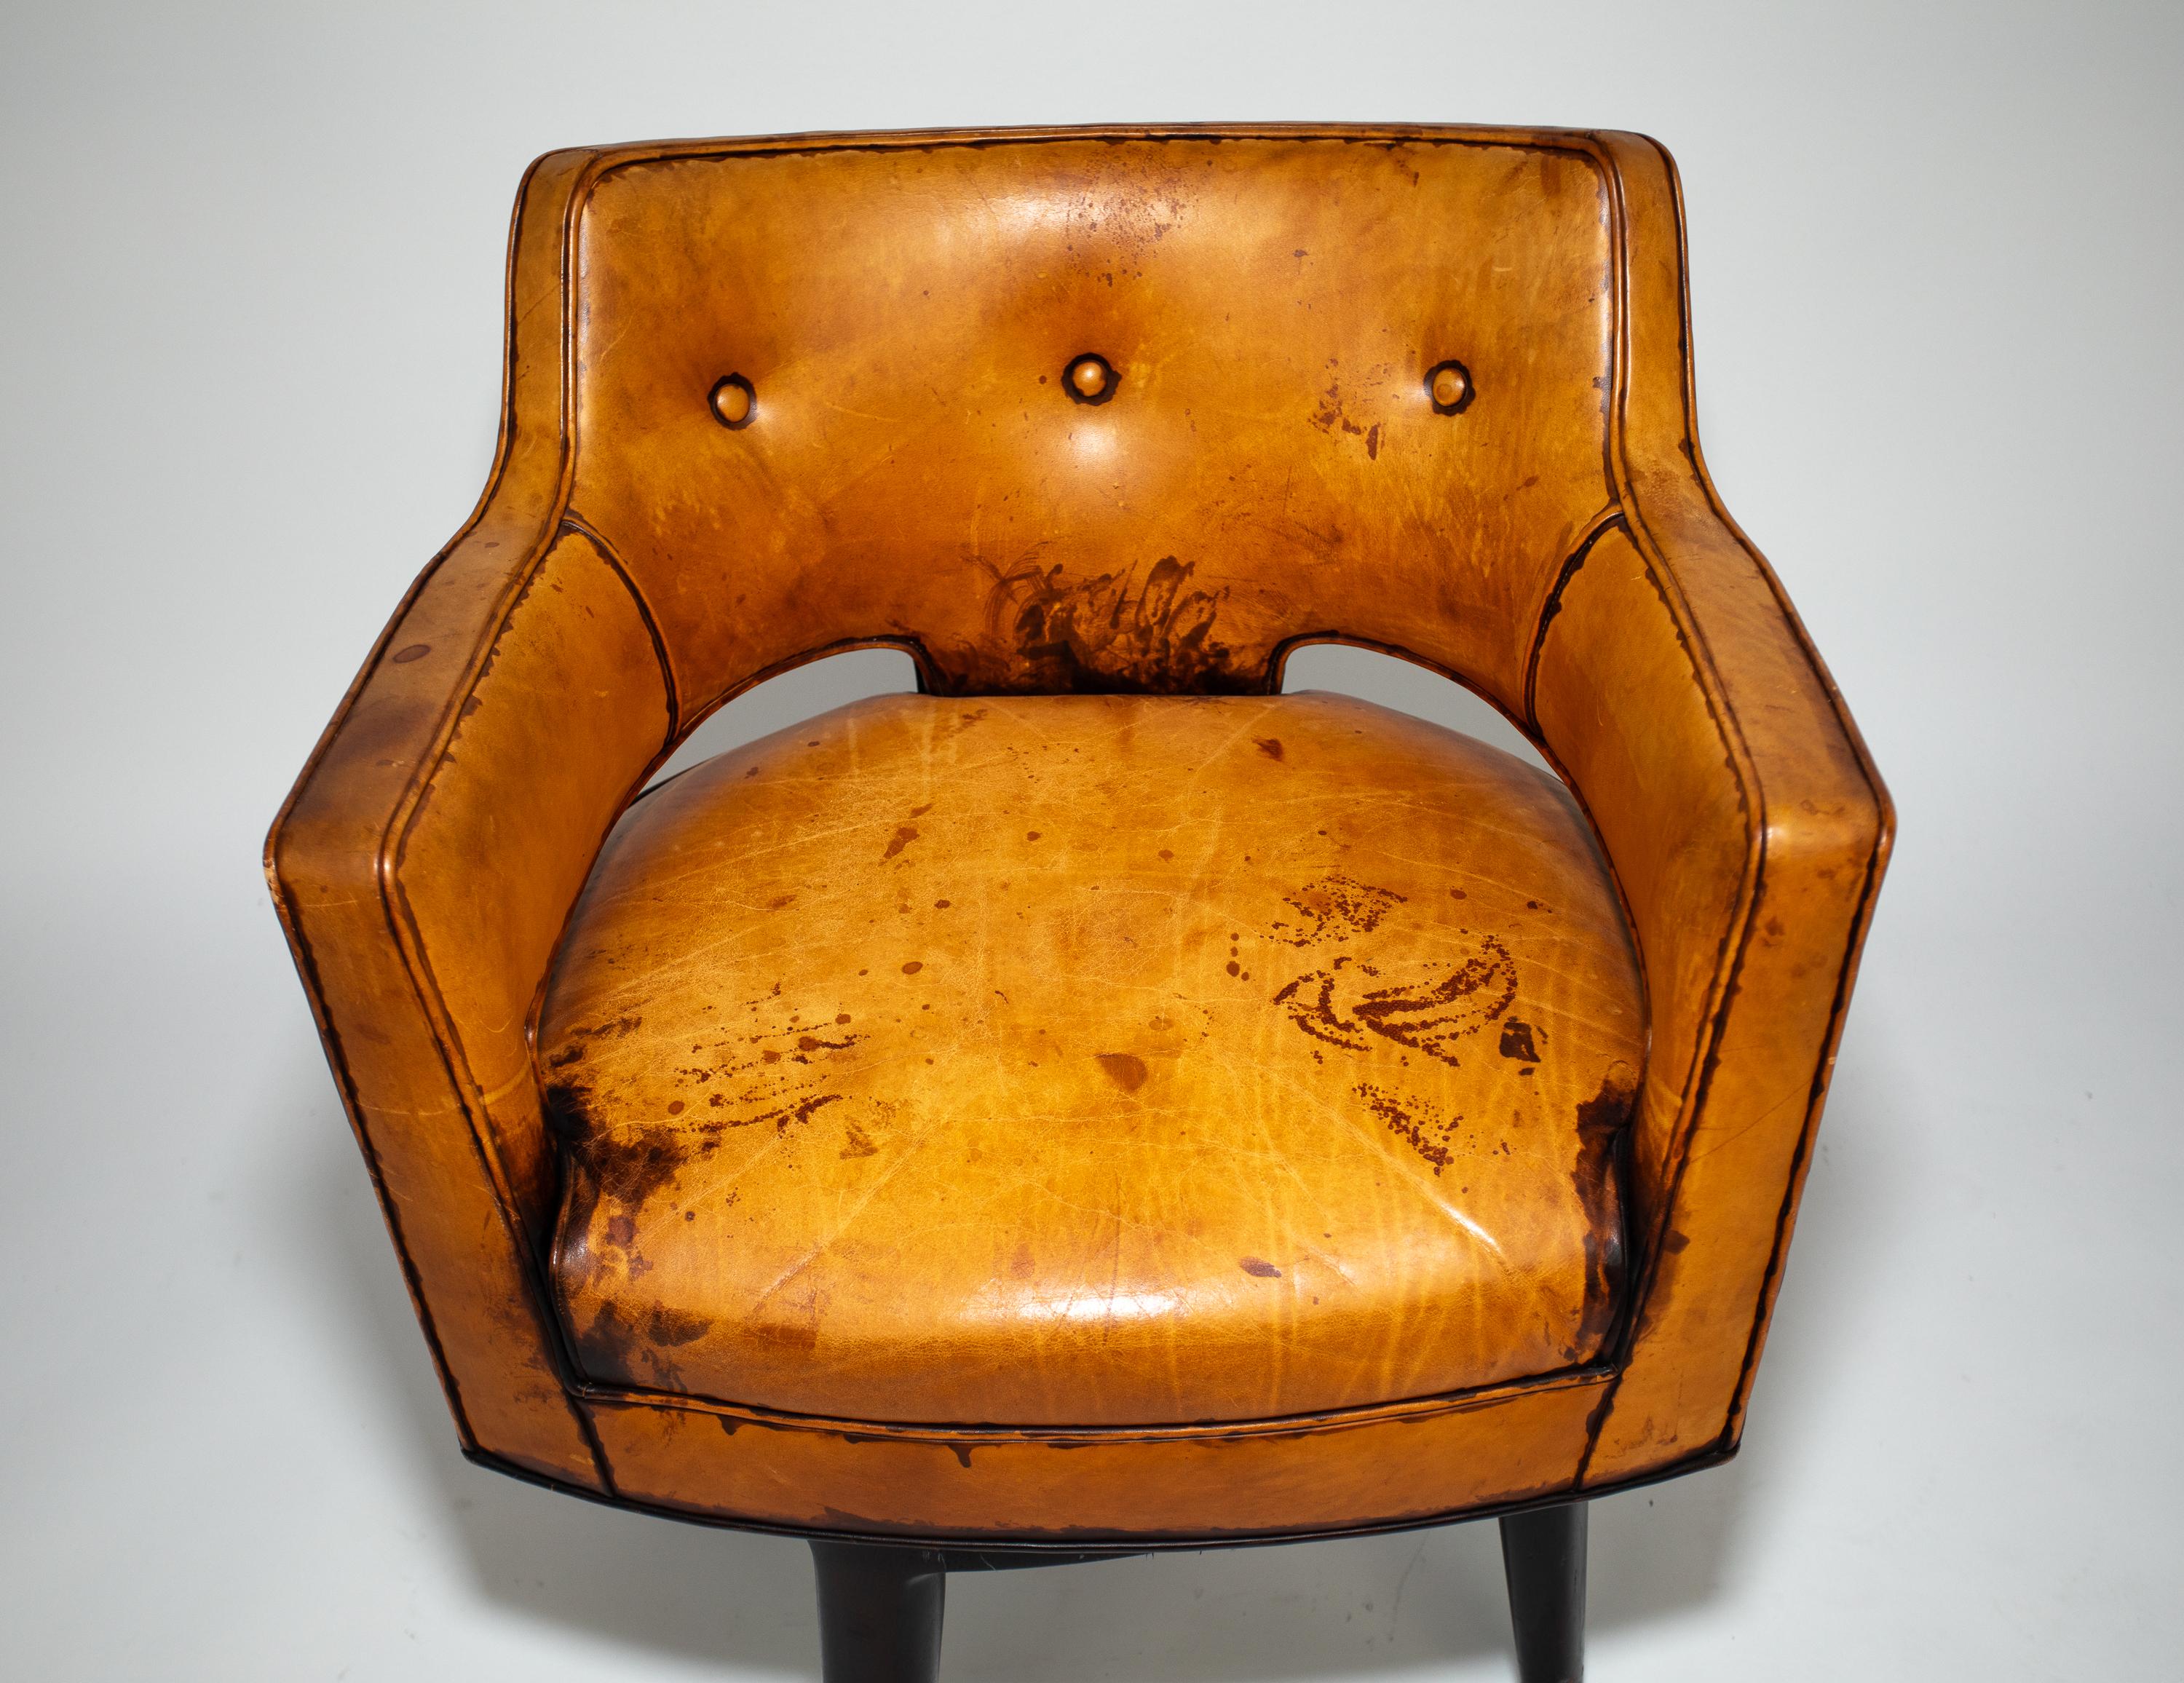 Edward Wormley Patinated Leather Swivel Arm Chair
An early form manufactured by Dunbar